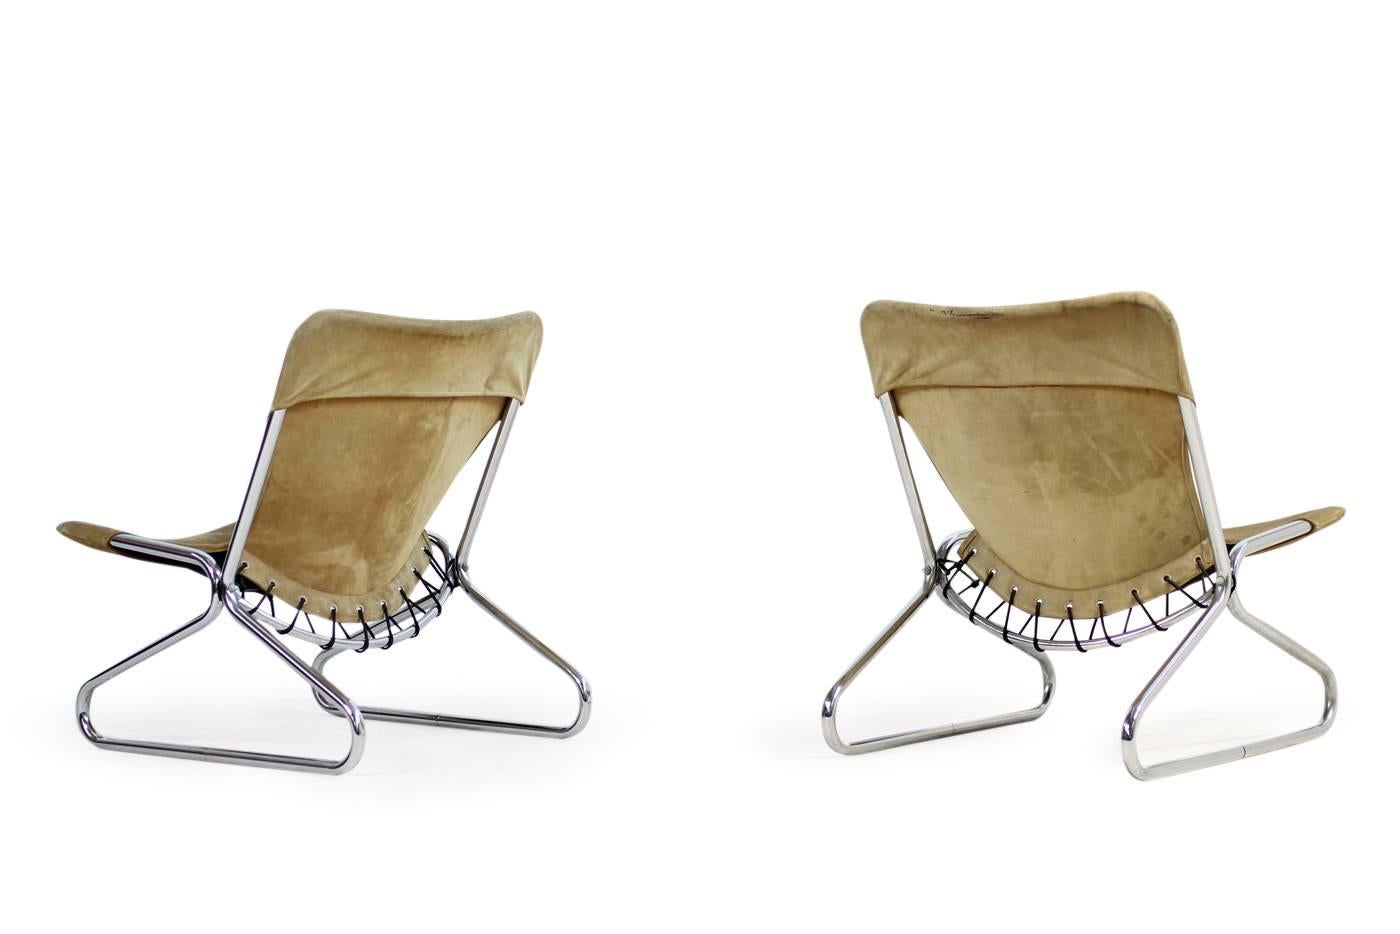 Swedish Pair of 1960s Suede Leather and Chrome Easy Lounge Chairs Danish Modern